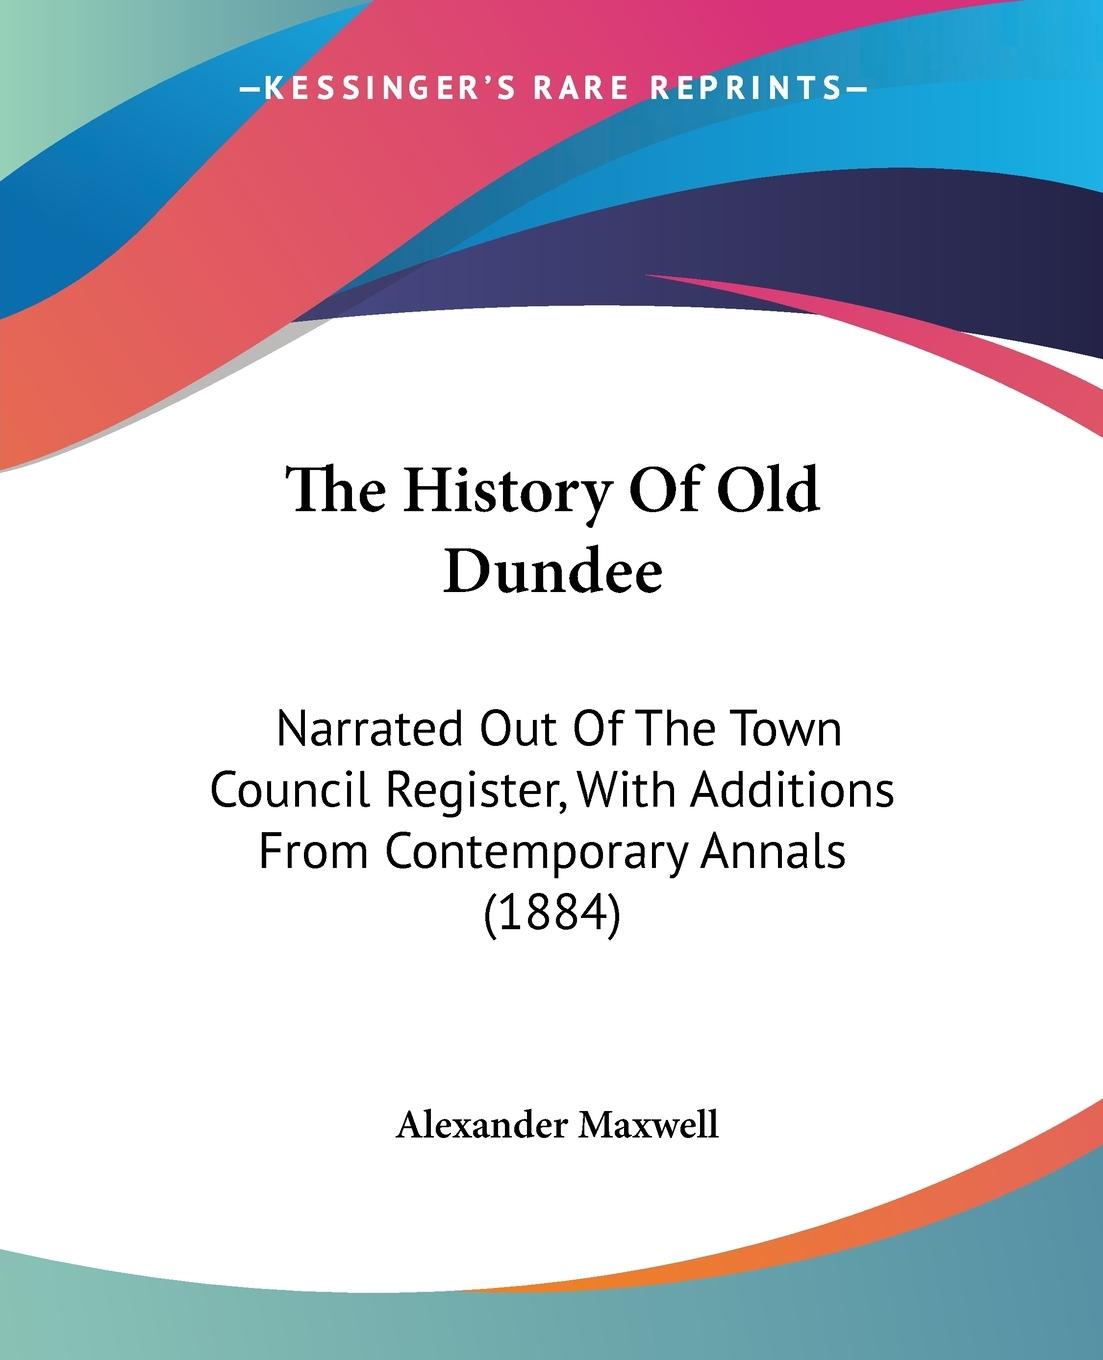 The History Of Old Dundee - Maxwell, Alexander